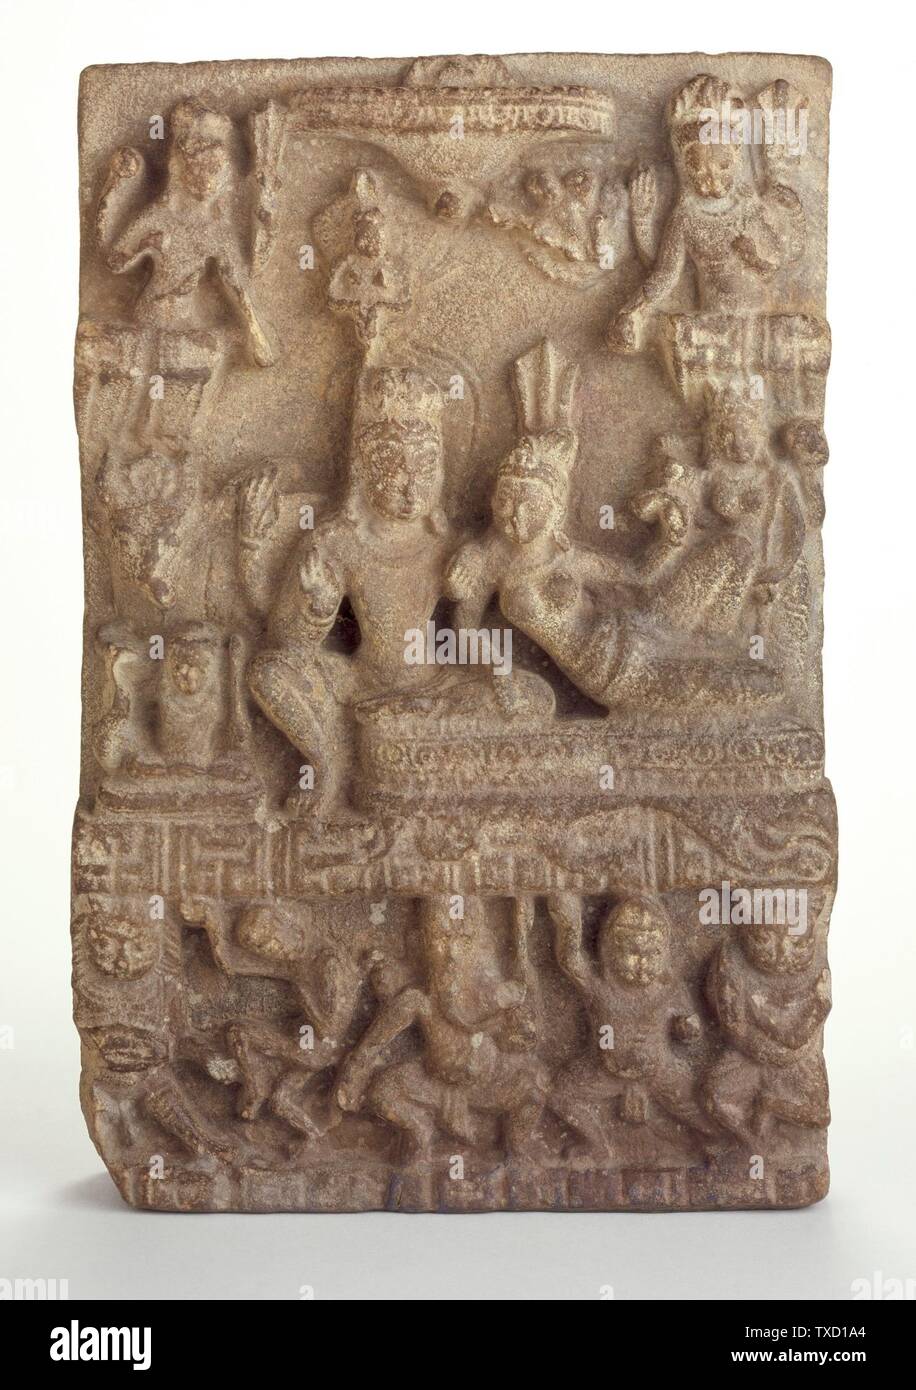 Shiva's Family;  Nepal, 9th century Sculpture Stone Gift of The Ahmanson Foundation (M.81.23) South and Southeast Asian Art; 9th century date QS:P571,+850-00-00T00:00:00Z/7; Stock Photo